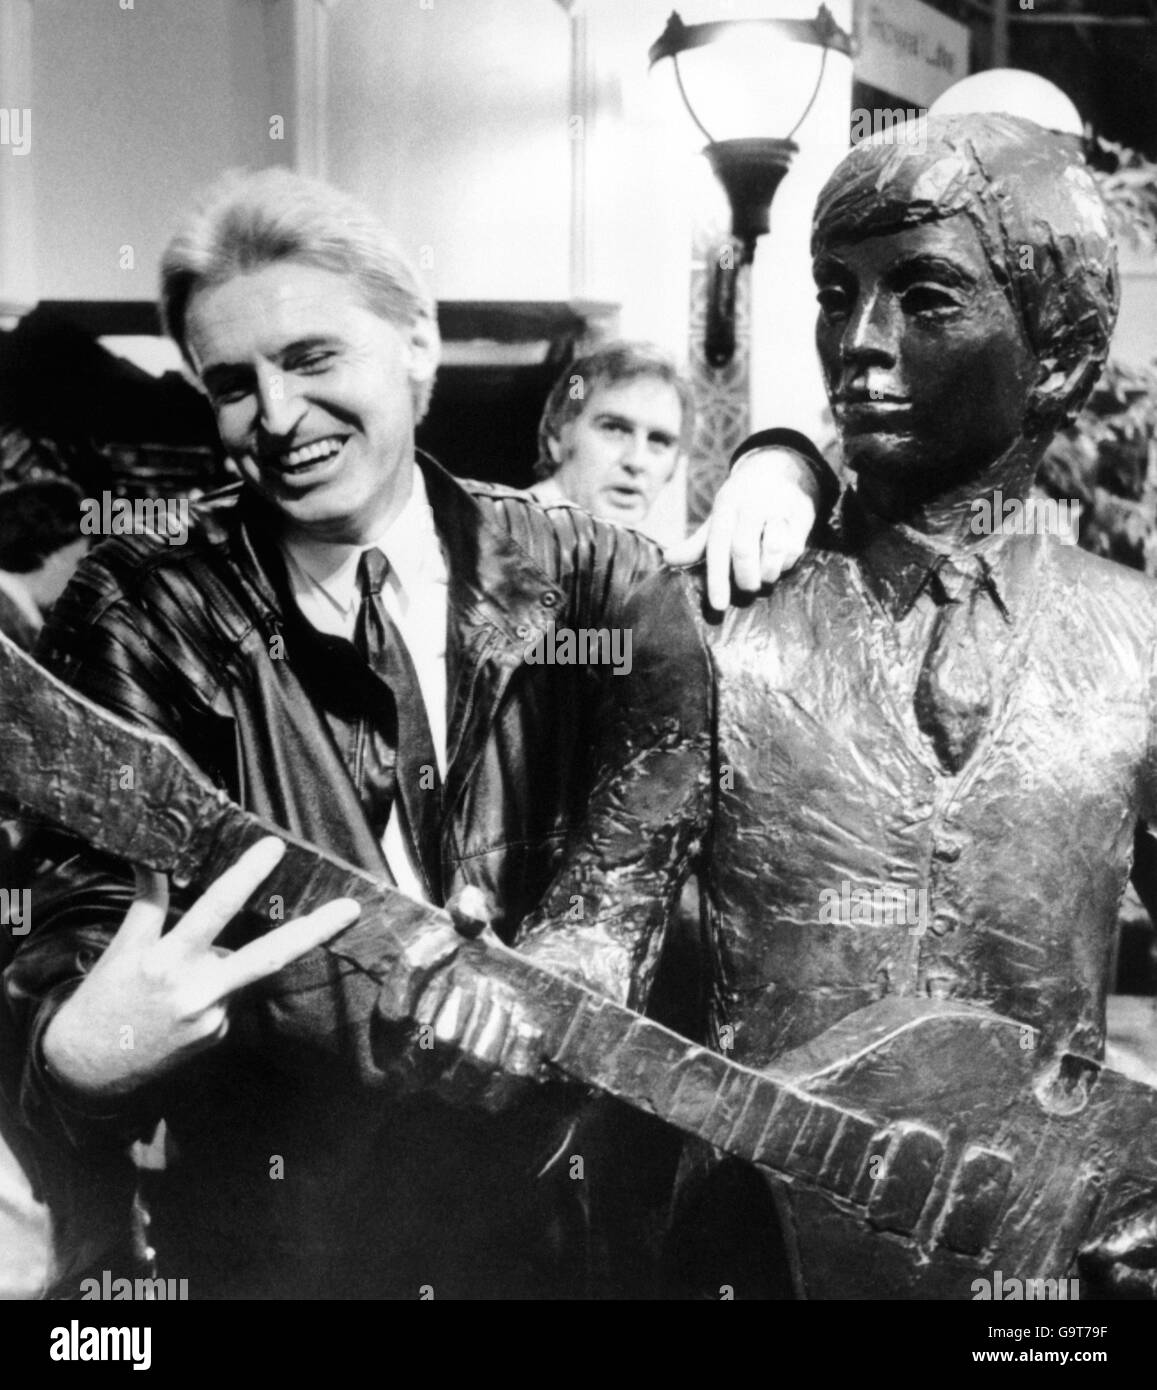 Mick McGear brother of former Beatle Paul McCartney becomes part of a duet with the figure of Paul. A section of the Beatles sculpture unveiled in the Cavern Walks, Liverpool Stock Photo